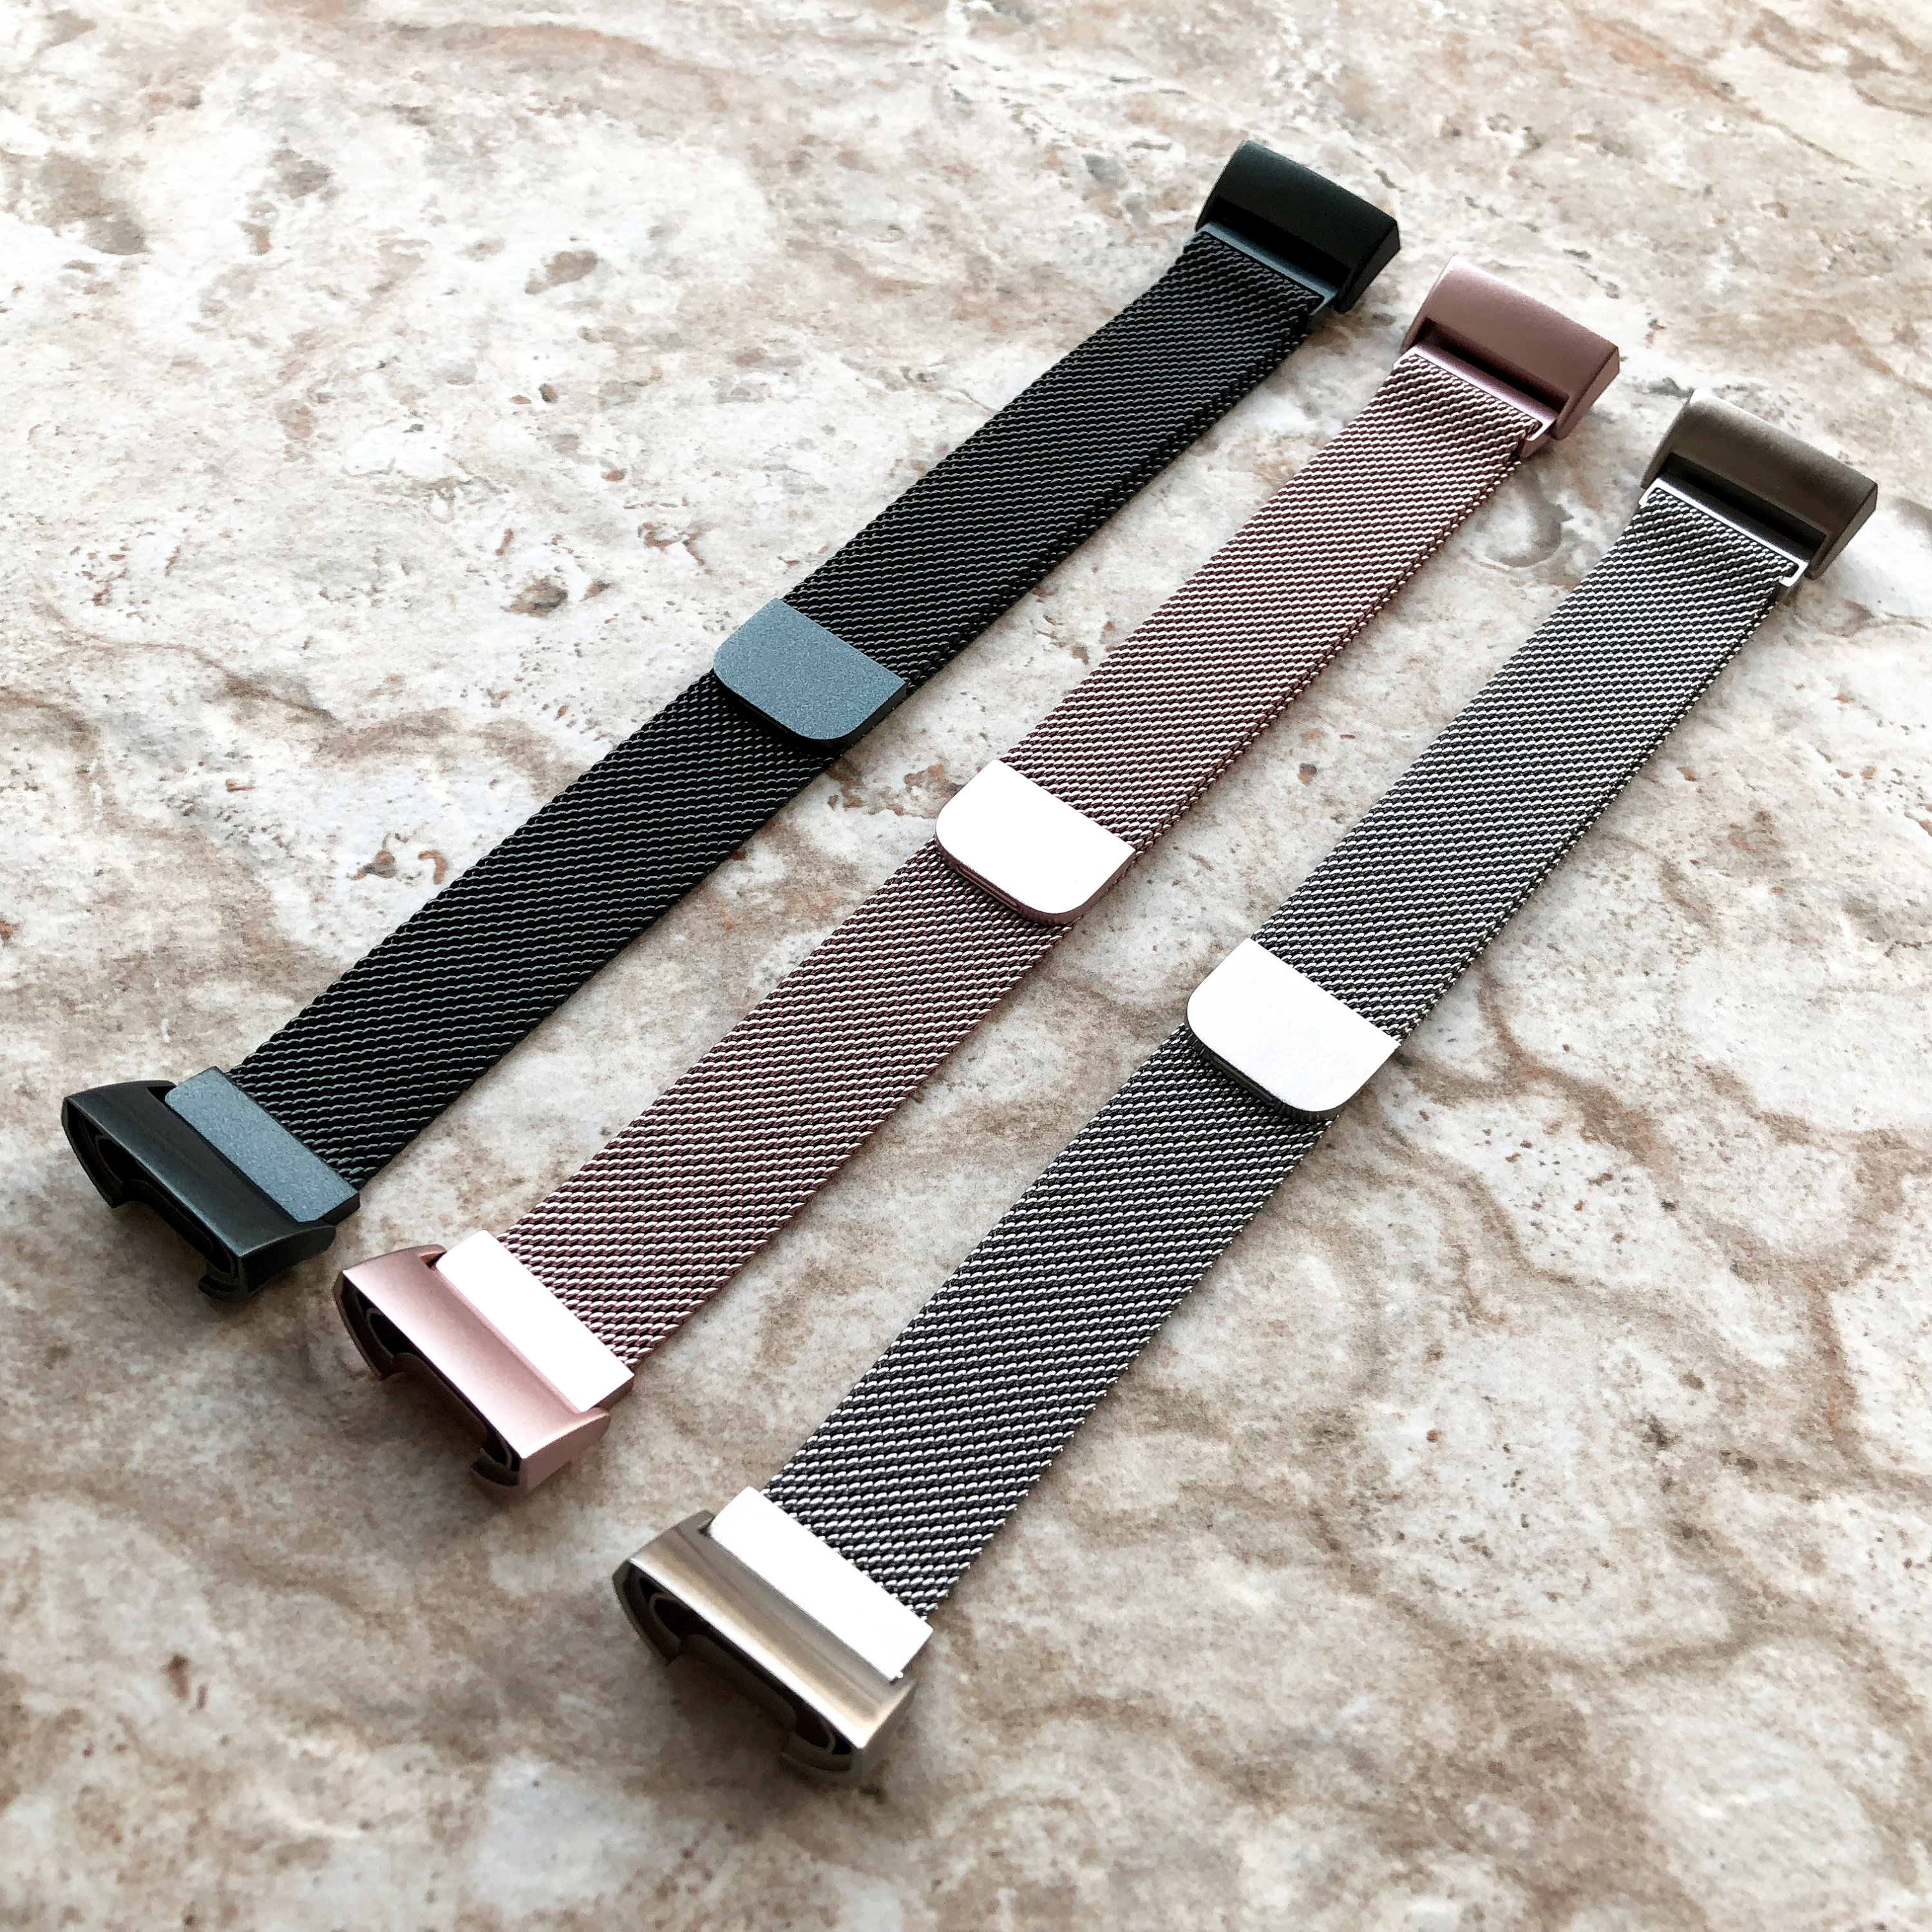 fitbit silver band